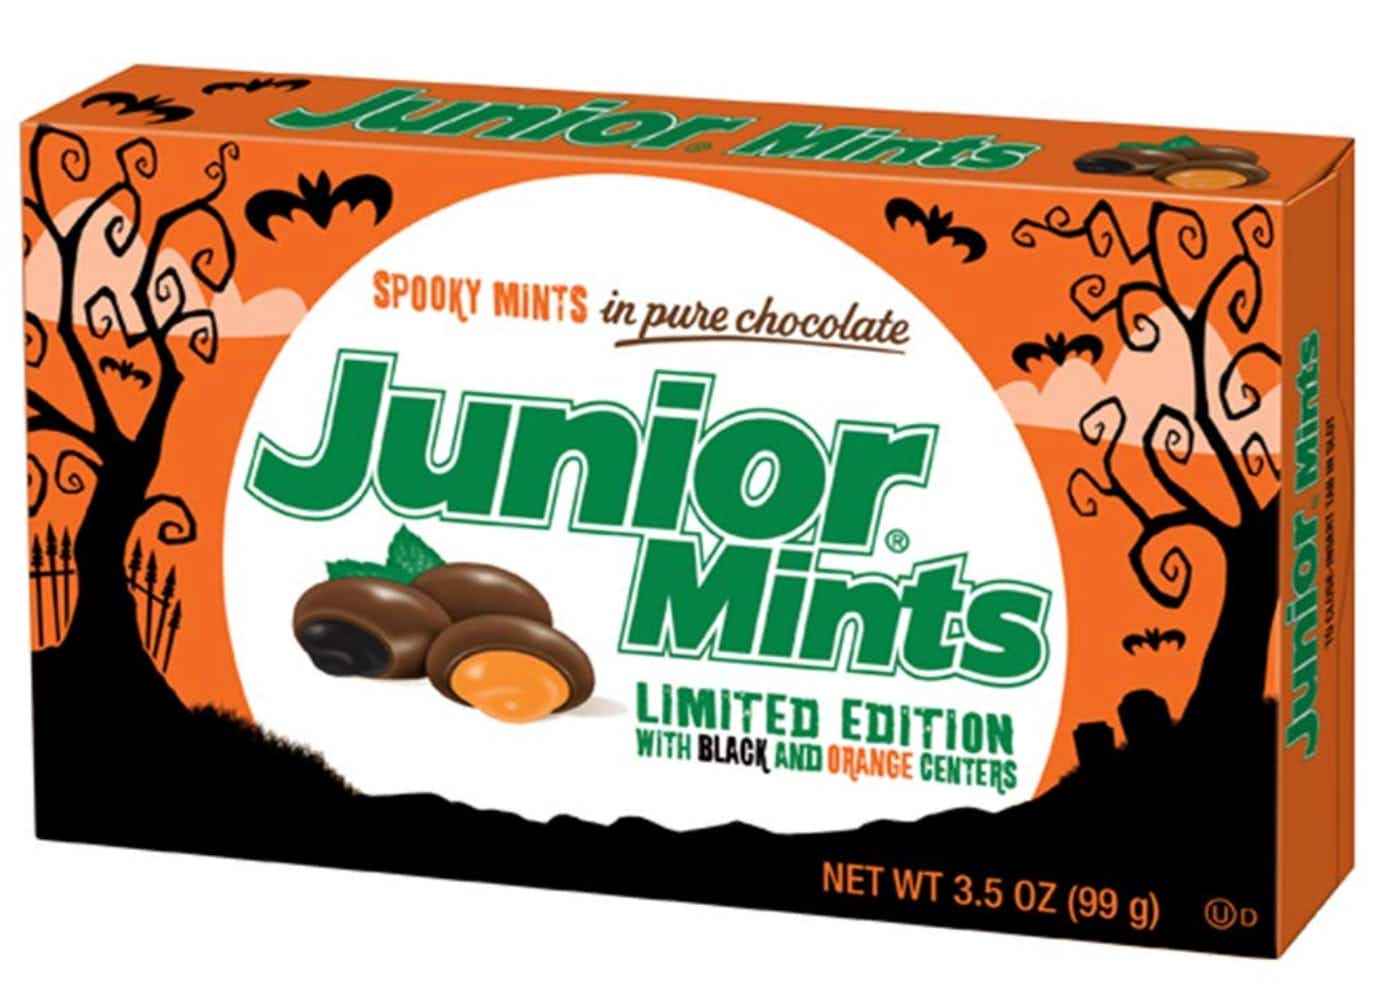 Junior mints Halloween limited edition candy box.